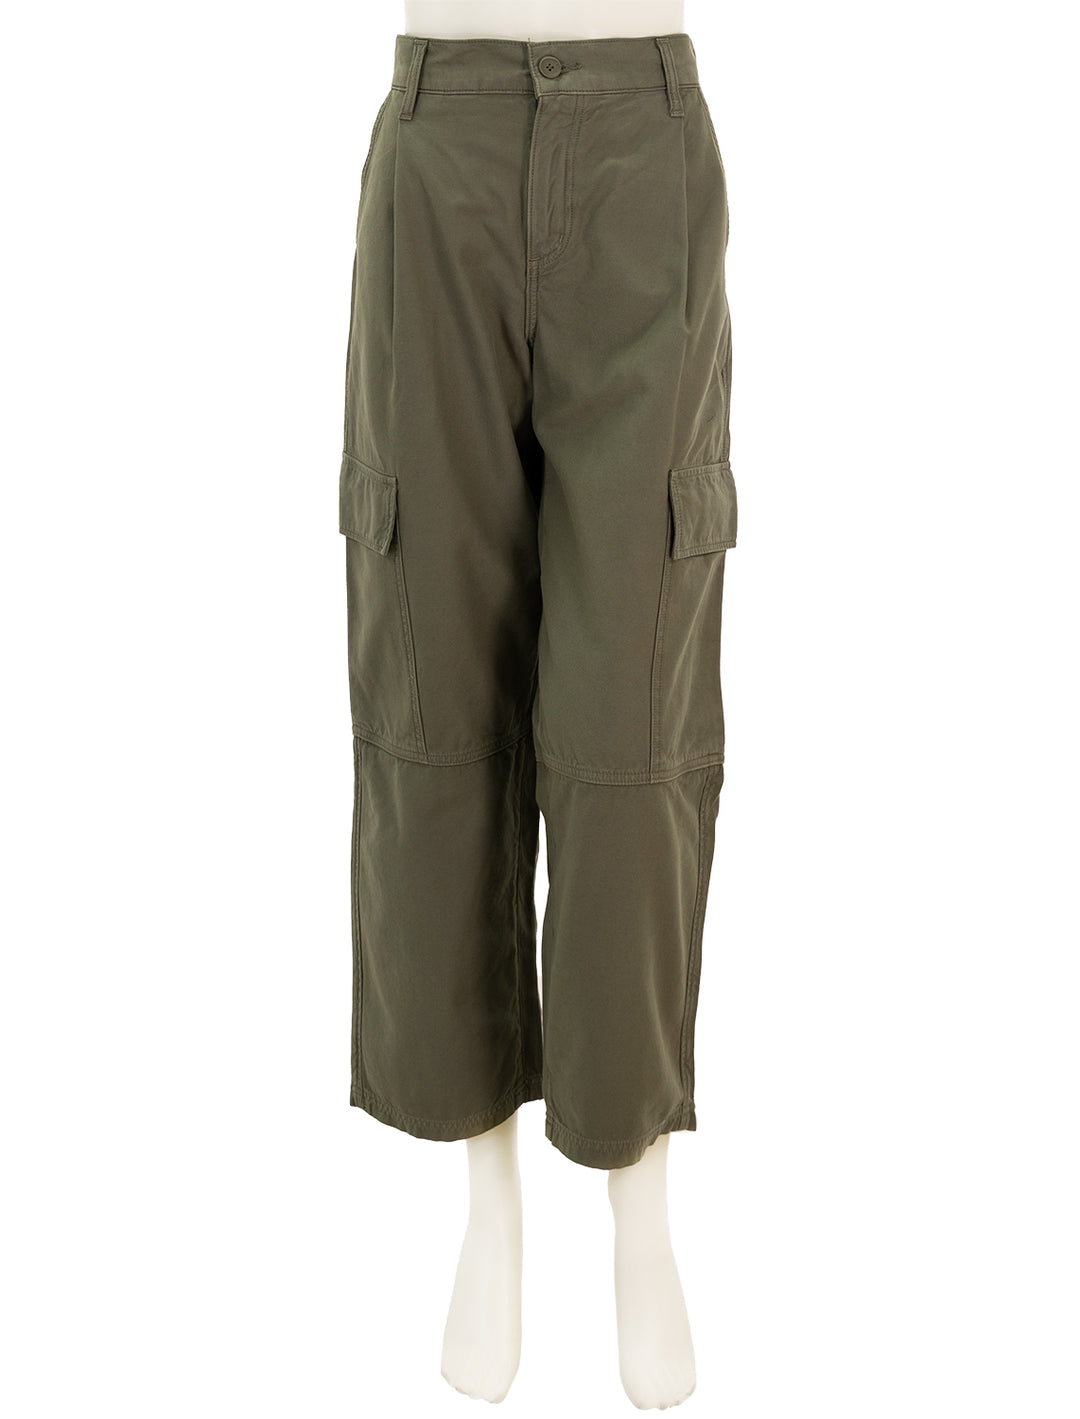 Front view of AGOLDE's jericho pant in fatigue.